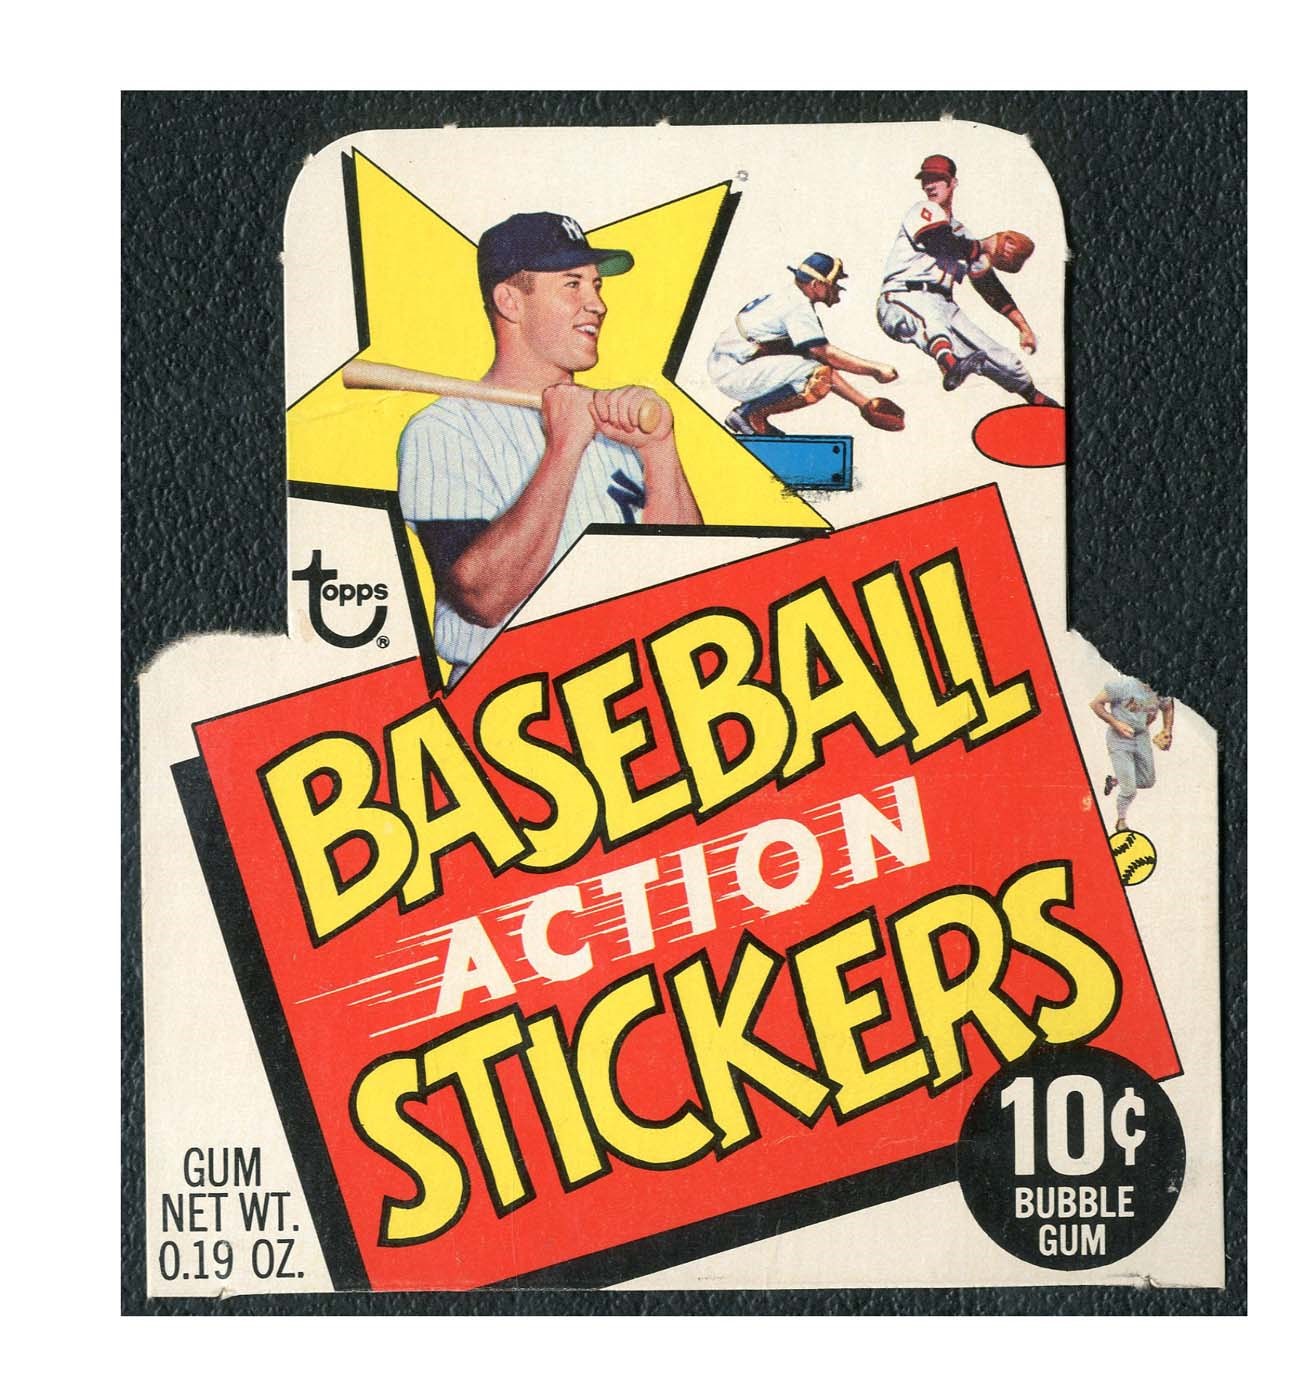 - 1968 Topps Baseball Action Stickers Box Top with Mickey Mantle - Extremely Rare!